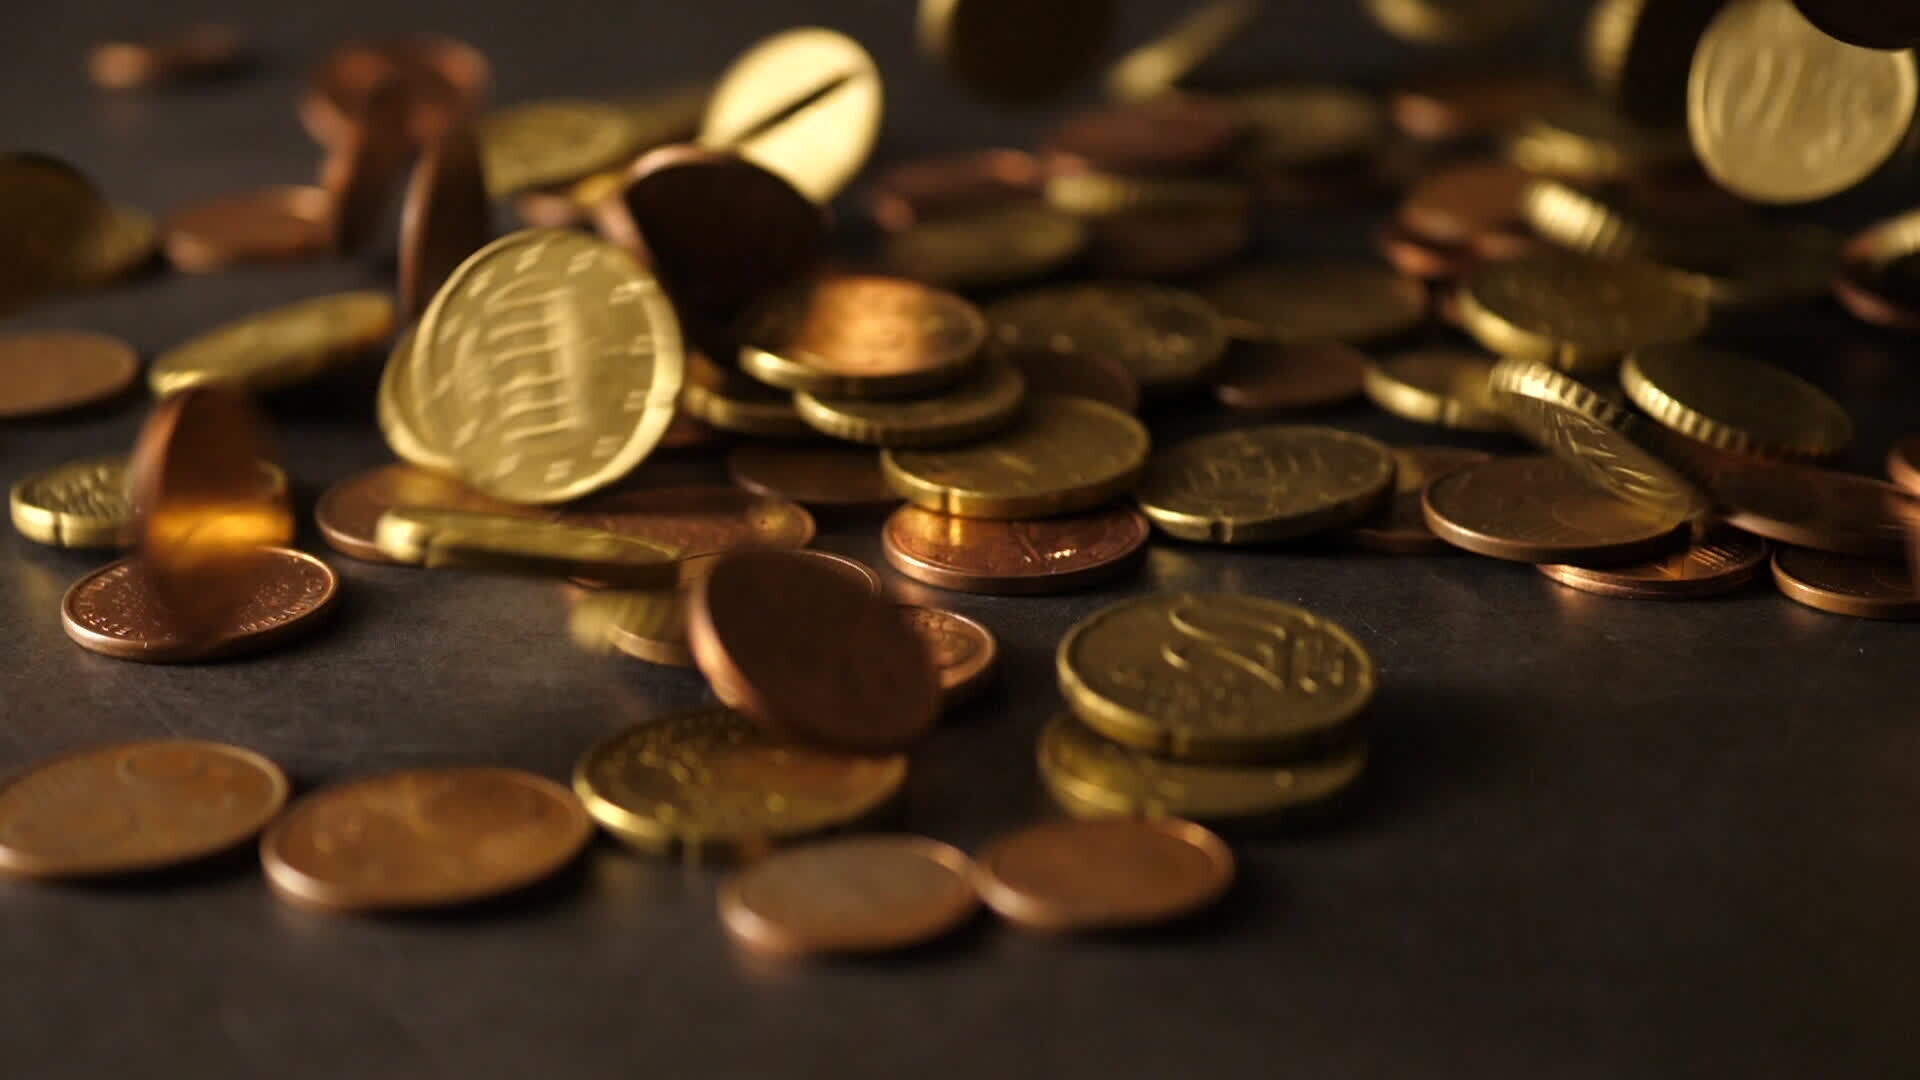 Gold Coin Stock Video, Moving imagery, Financial symbol, Valuable footage, 1920x1080 Full HD Desktop